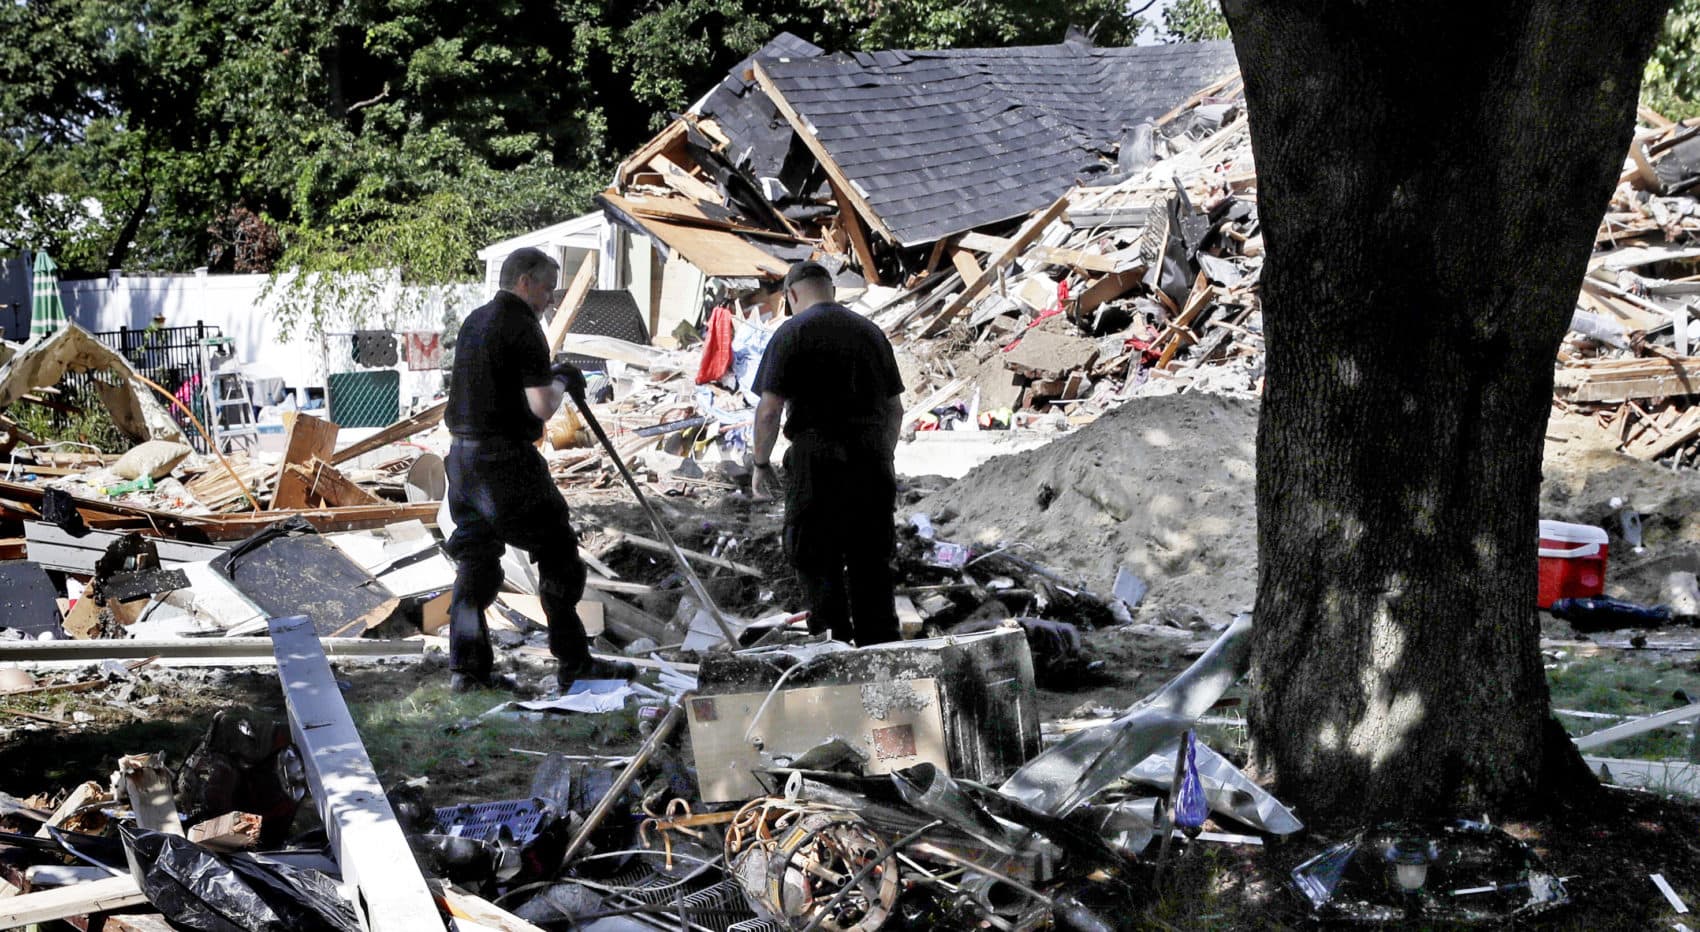 Fire investigators pause while searching the debris at a home which exploded following a gas line failure in Lawrence. (Charles Krupa/AP)